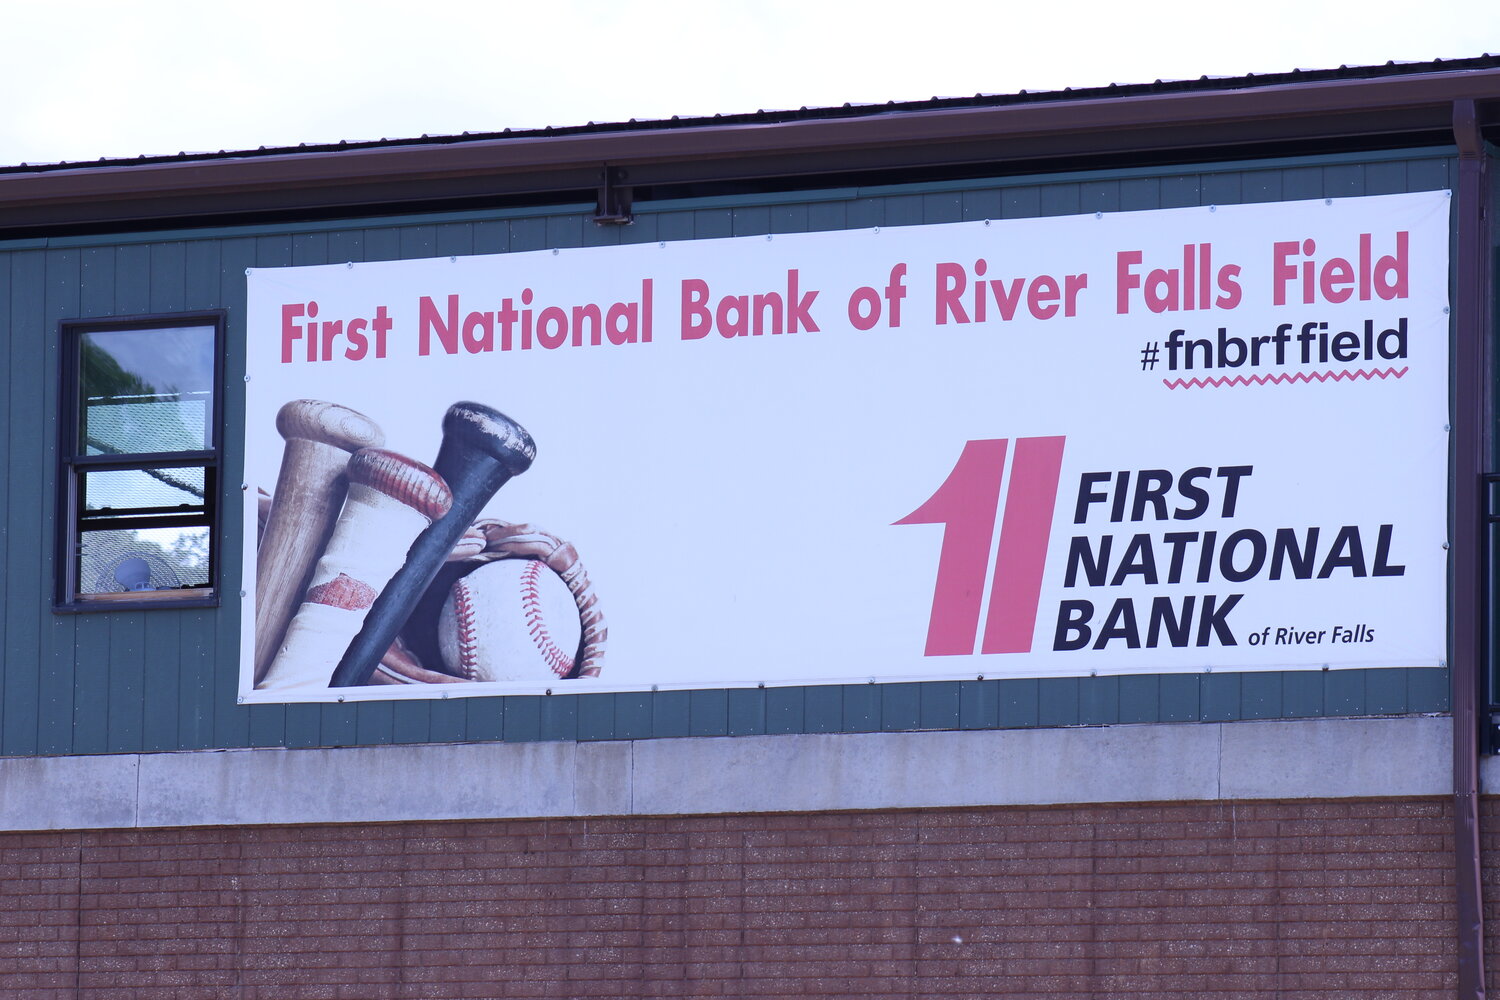 The First National Bank of River Falls field has become home to several local teams since its construction finished just under a decade ago. The University of Wisconsin-River Falls baseball team will be its newest occupant starting in 2025.